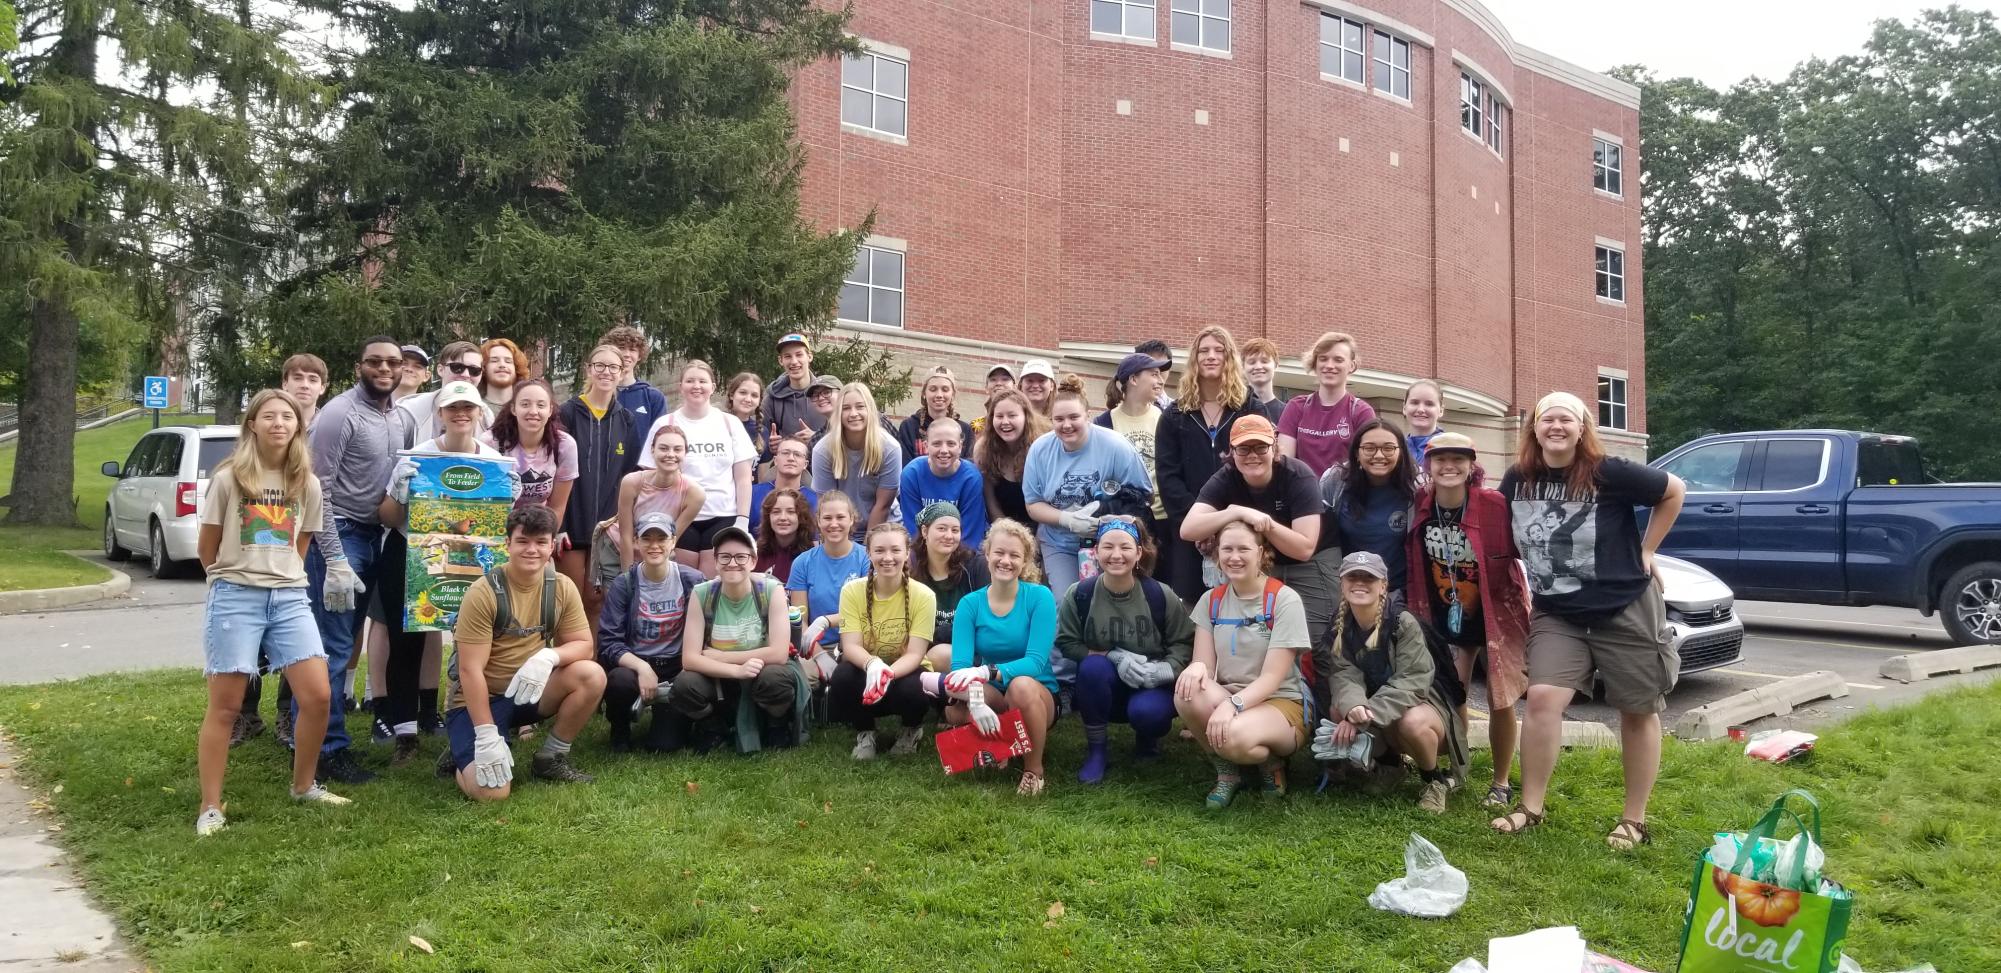 Among Allegheny’s representatives at the annual French Creek Cleanup were these 44 volunteers, who helped clean more than 1,000 pounds of waste from the watershed. (Photo contributed by Students for Environmental Action)